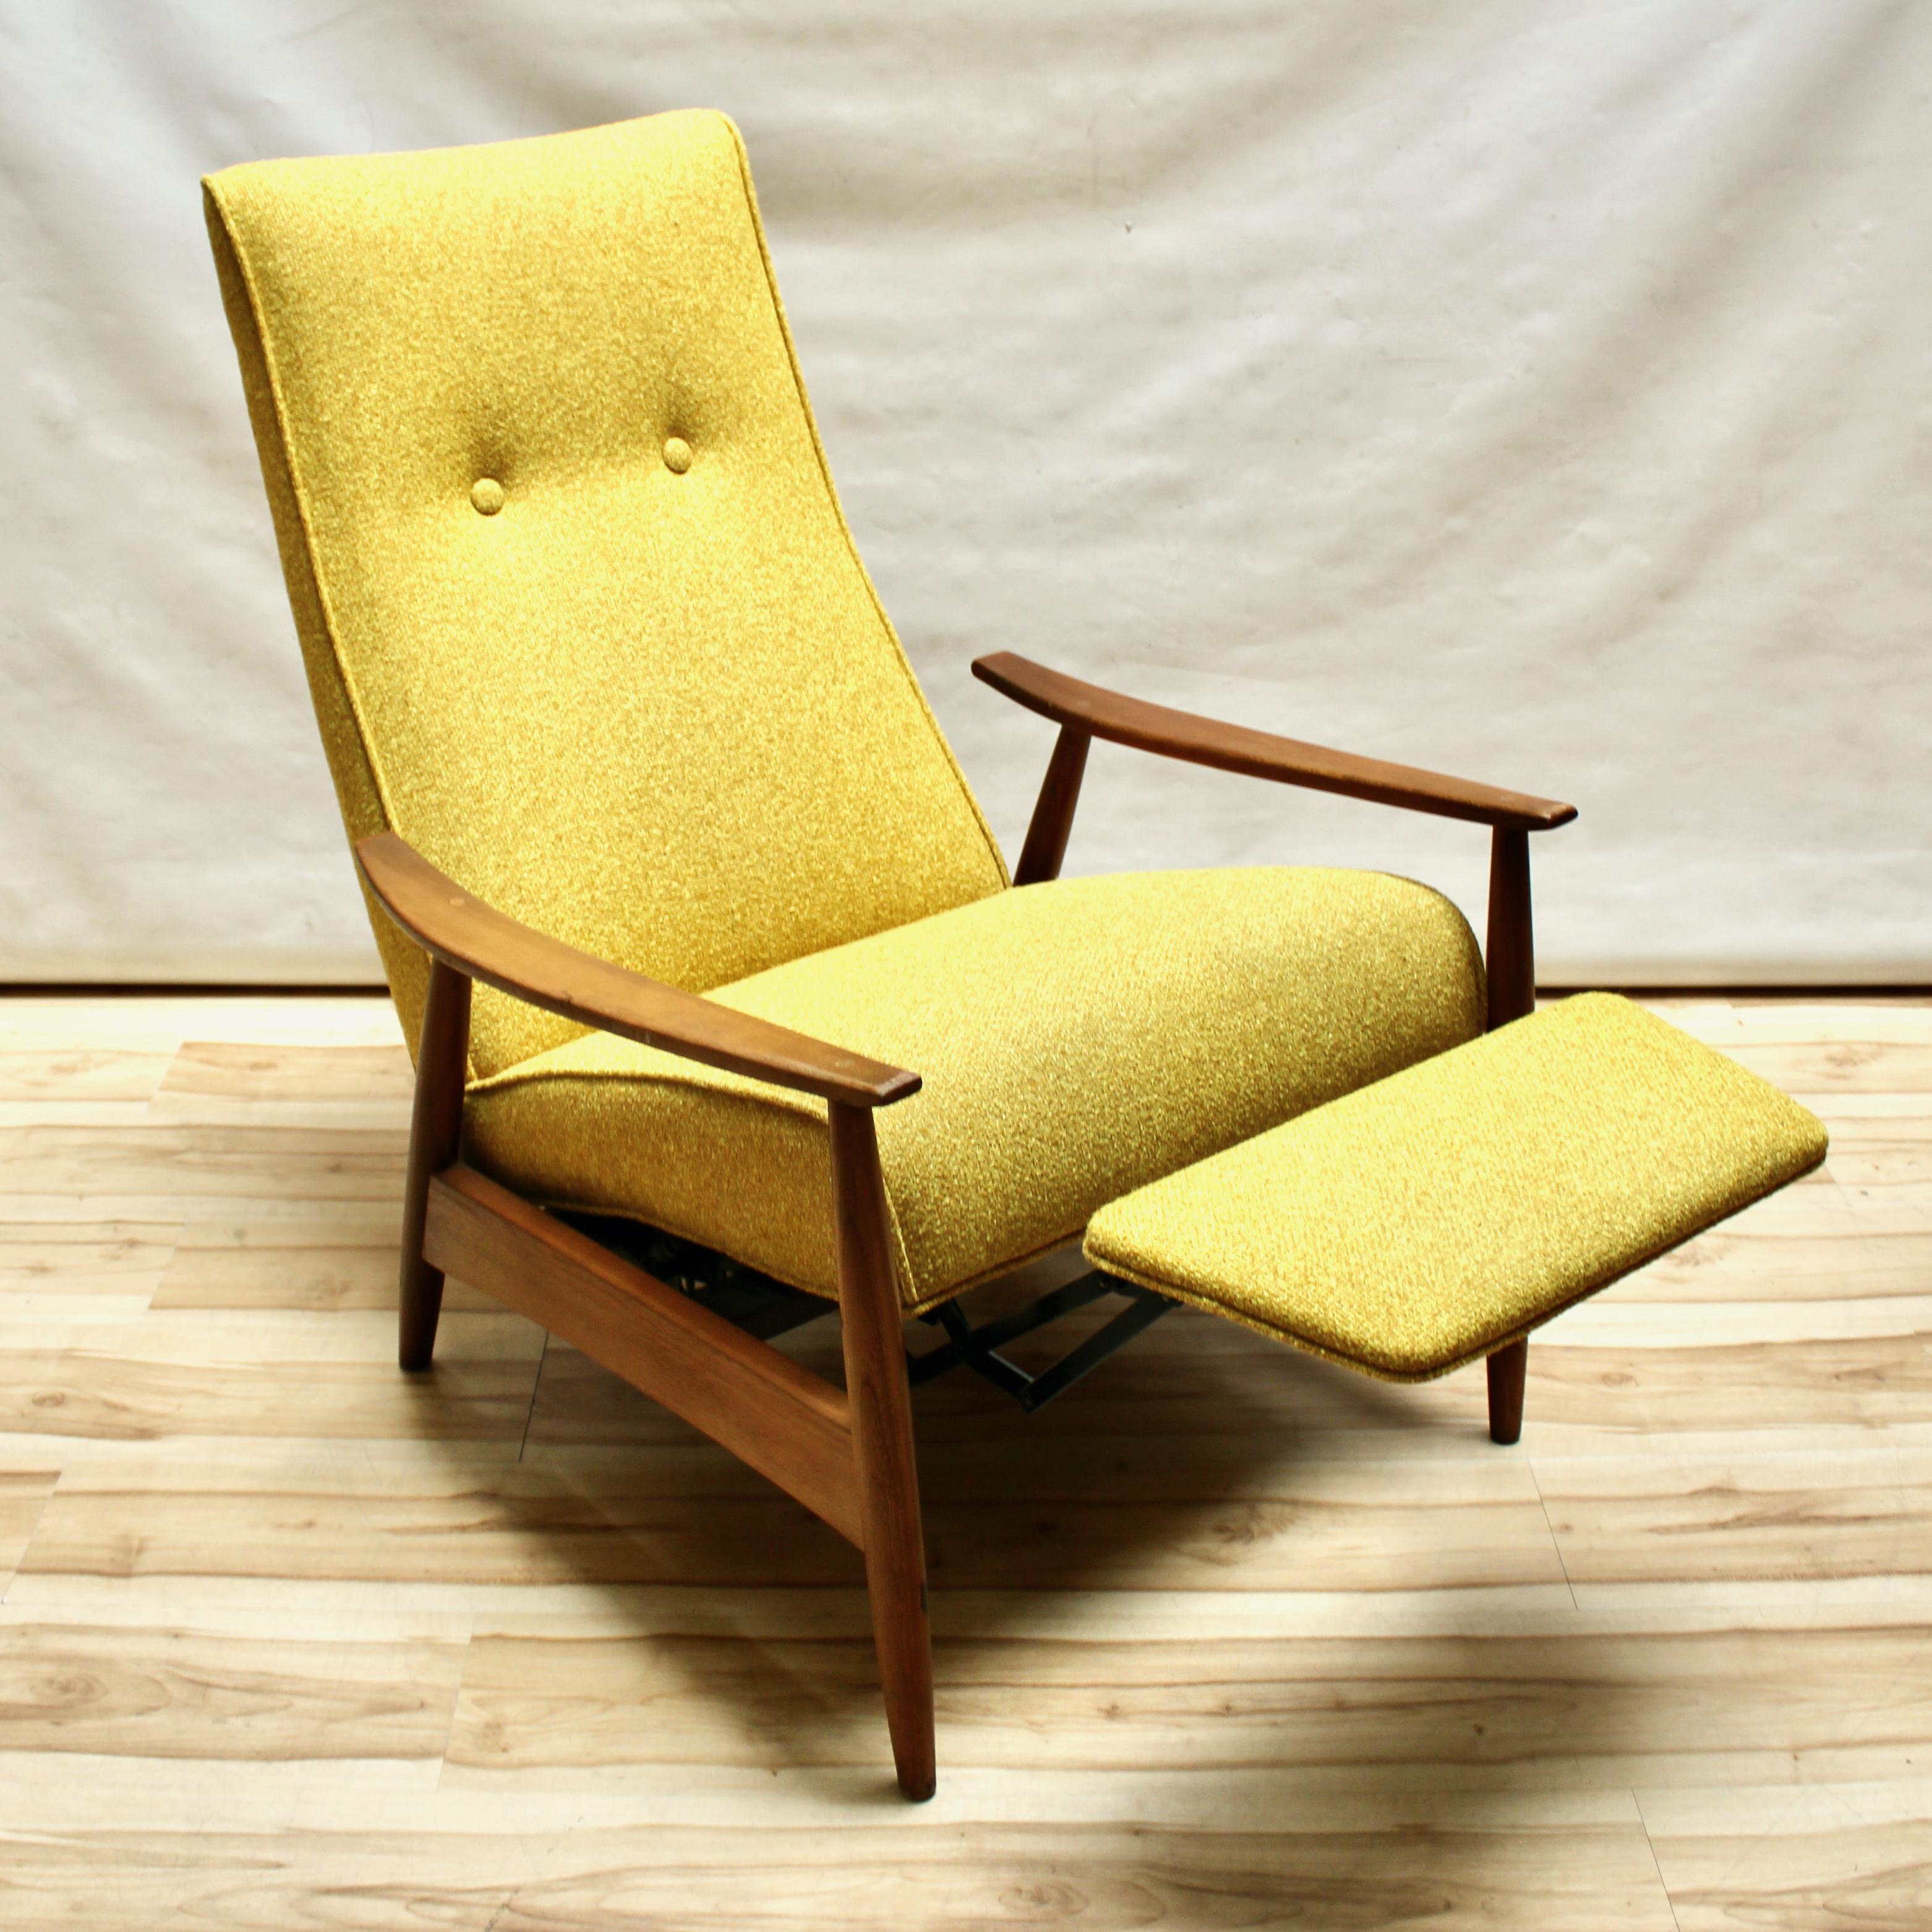 1960s Milo Baughman Model 74 reclining lounge. The chair has a wooden frame and the back and seat have been professionally reupholstered with new material, and the chair has an extendable footrest that fully retracts when upright. In excellent